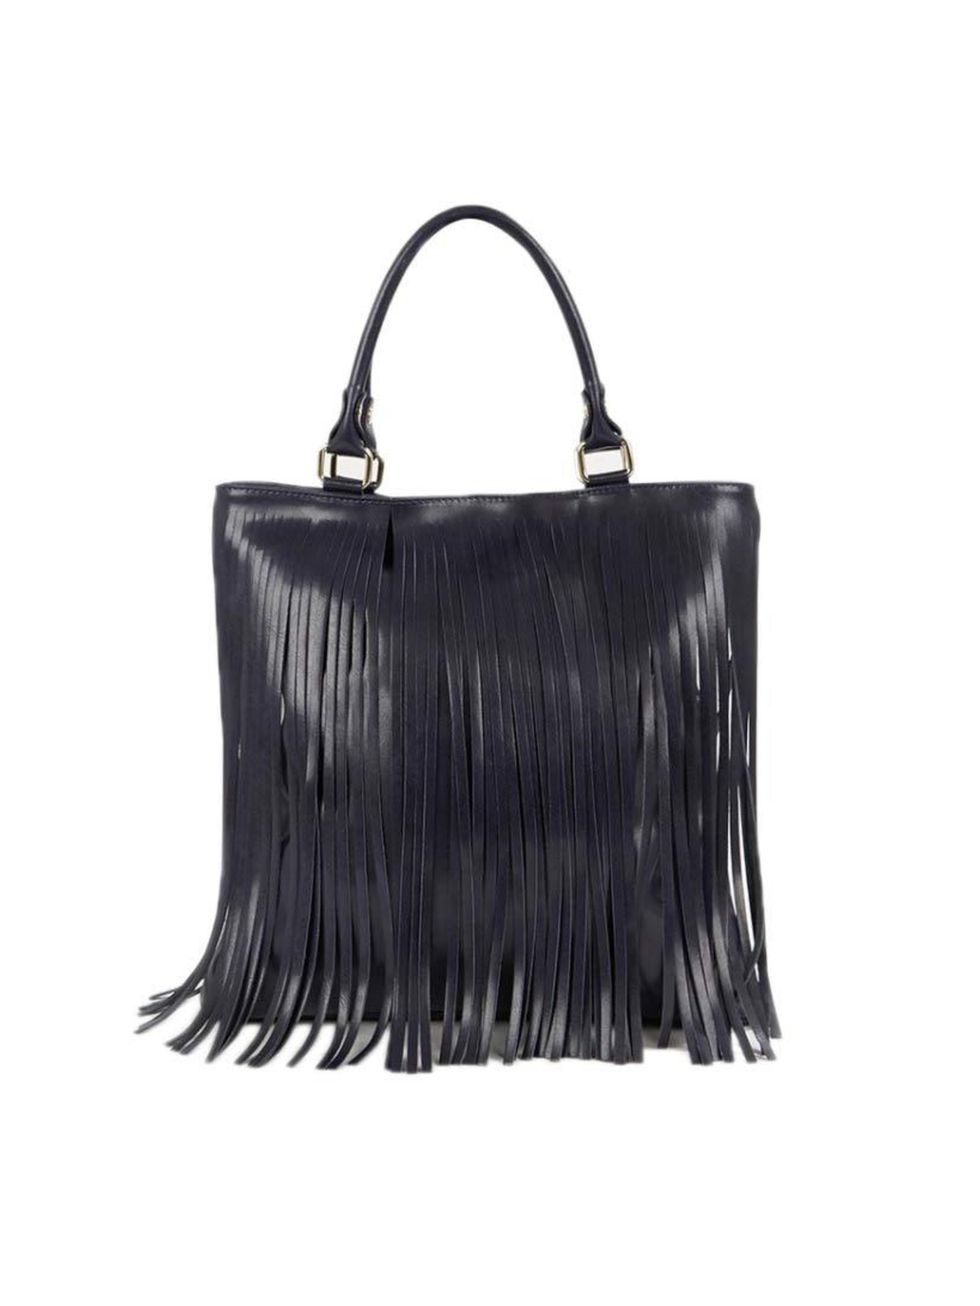 <p>There are hours of fun to be had perfecting your swishy walk.</p>

<p><a href="http://www.atterleyroad.com/navy-leather-fringed-tote.html" target="_blank">Atterley Road</a> bag, £89</p>